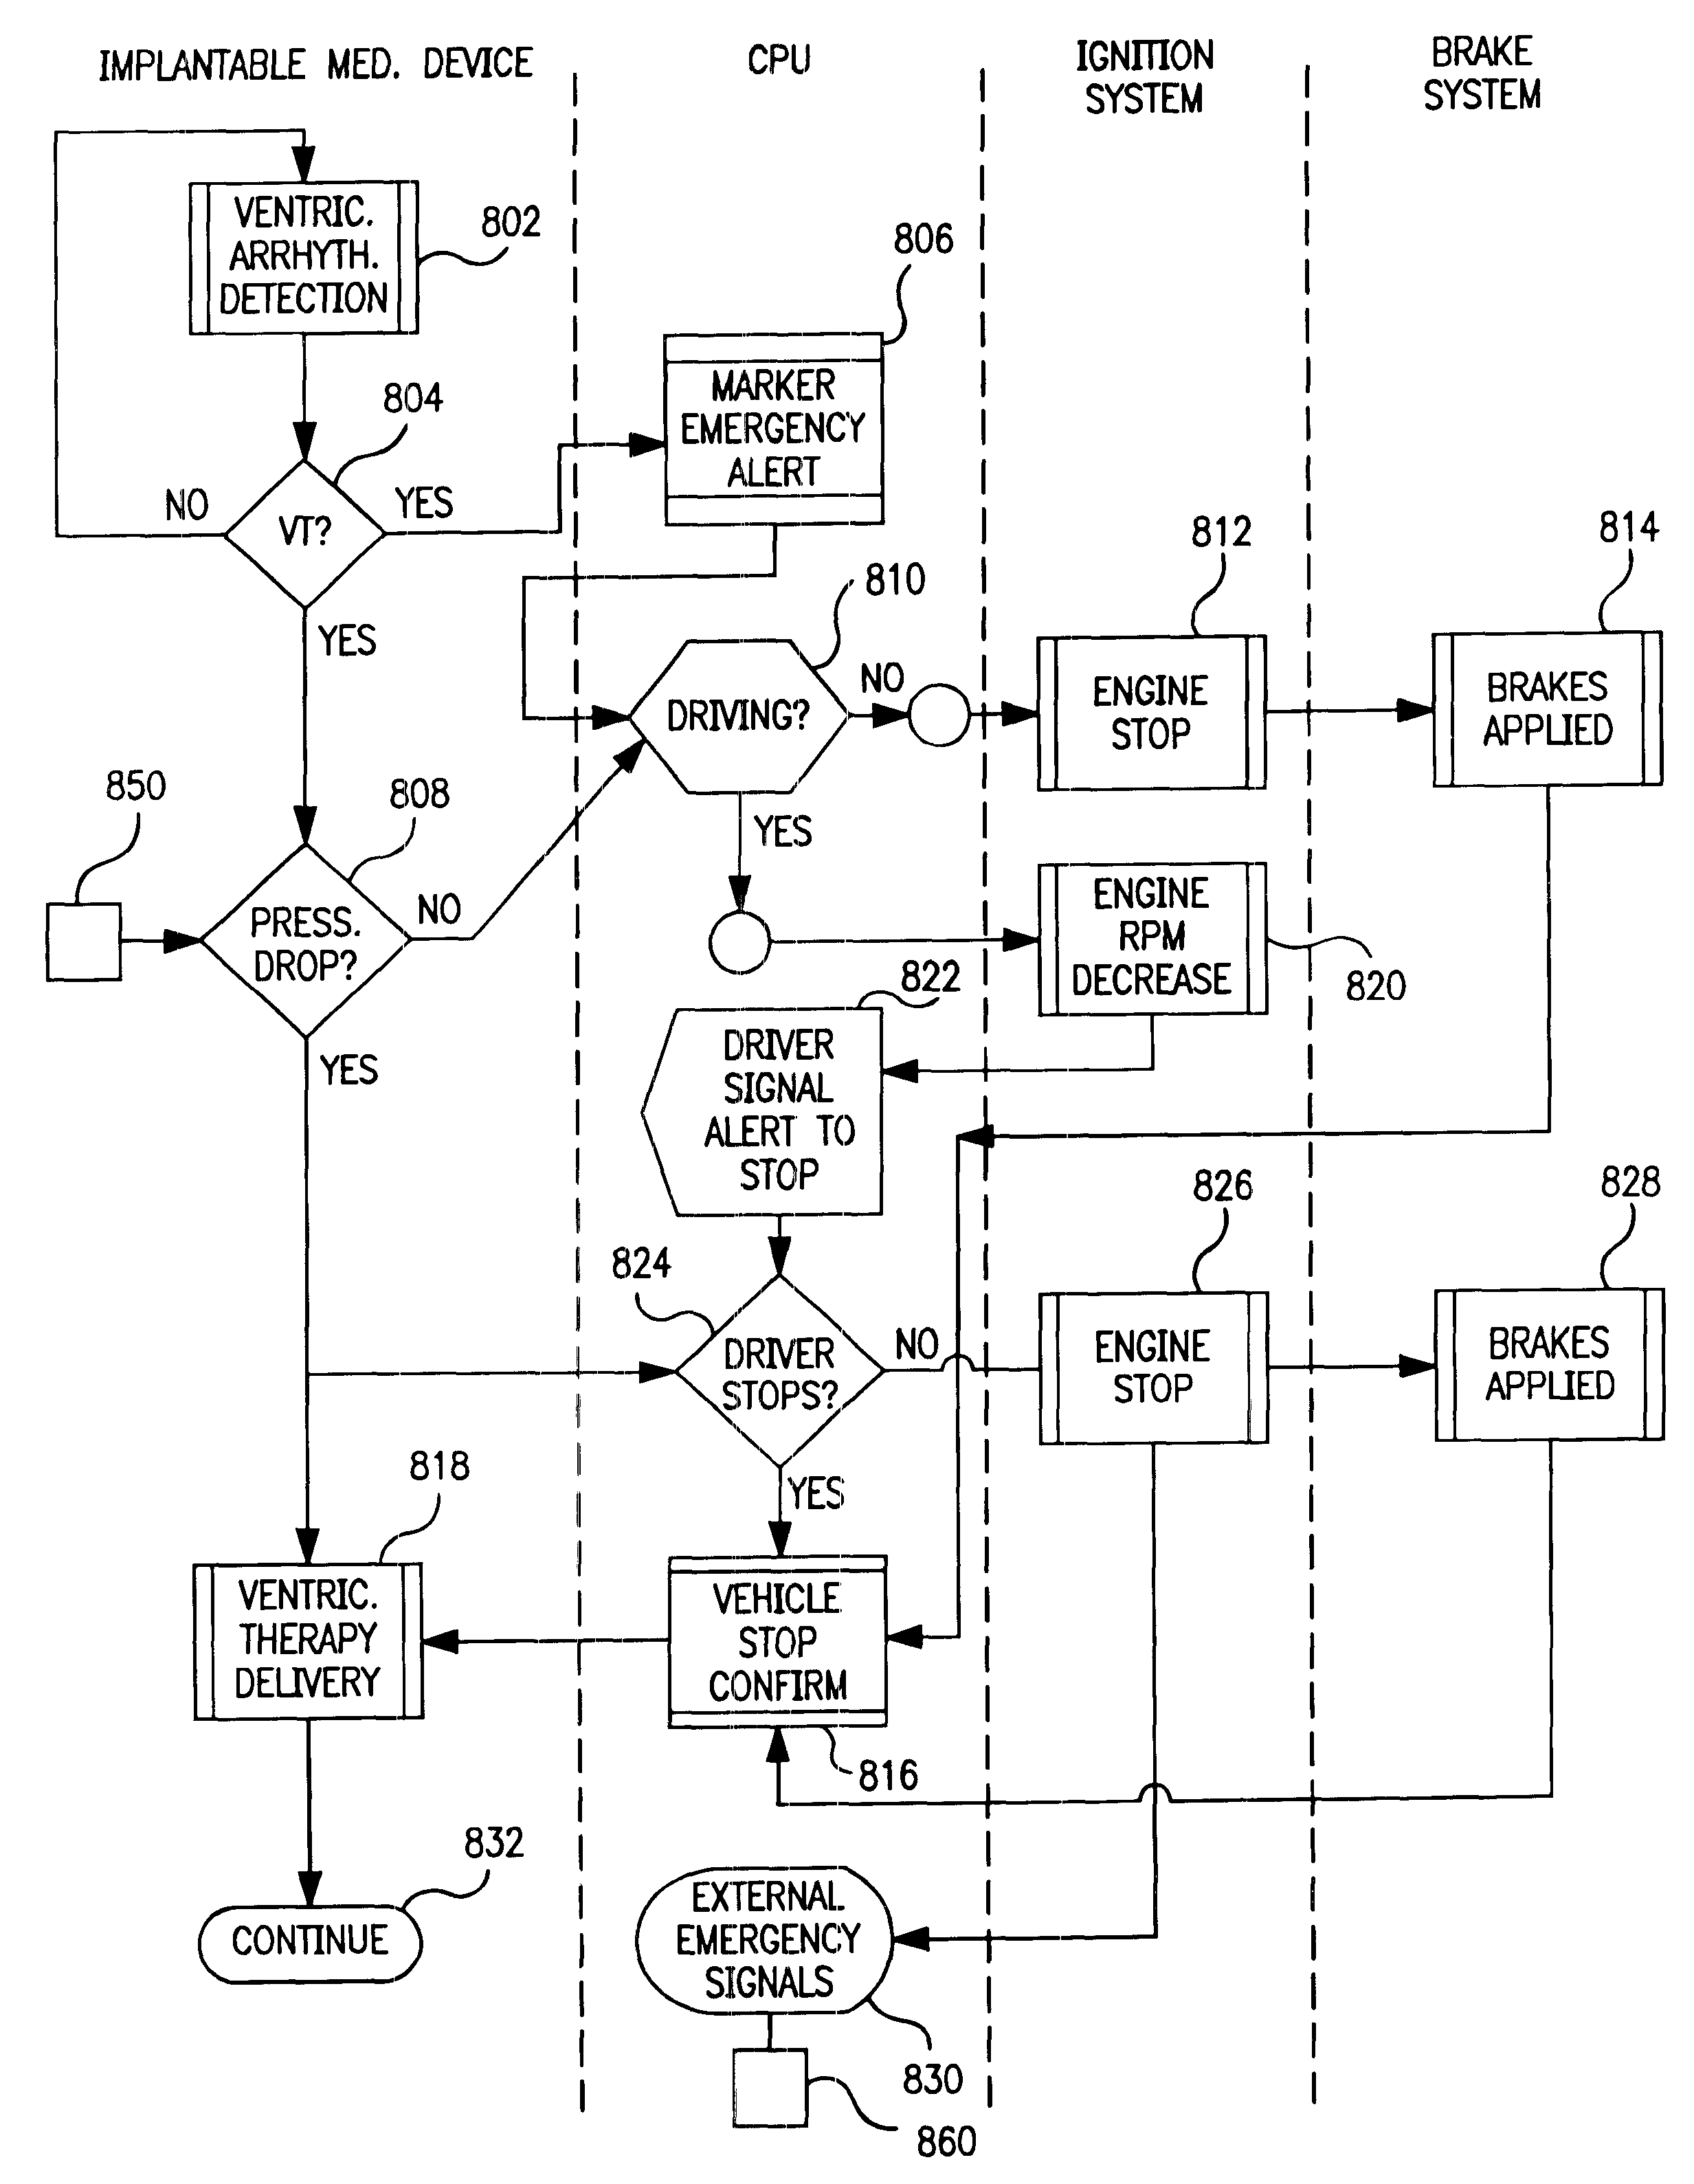 Implantable medical device telemetry control systems and methods of use